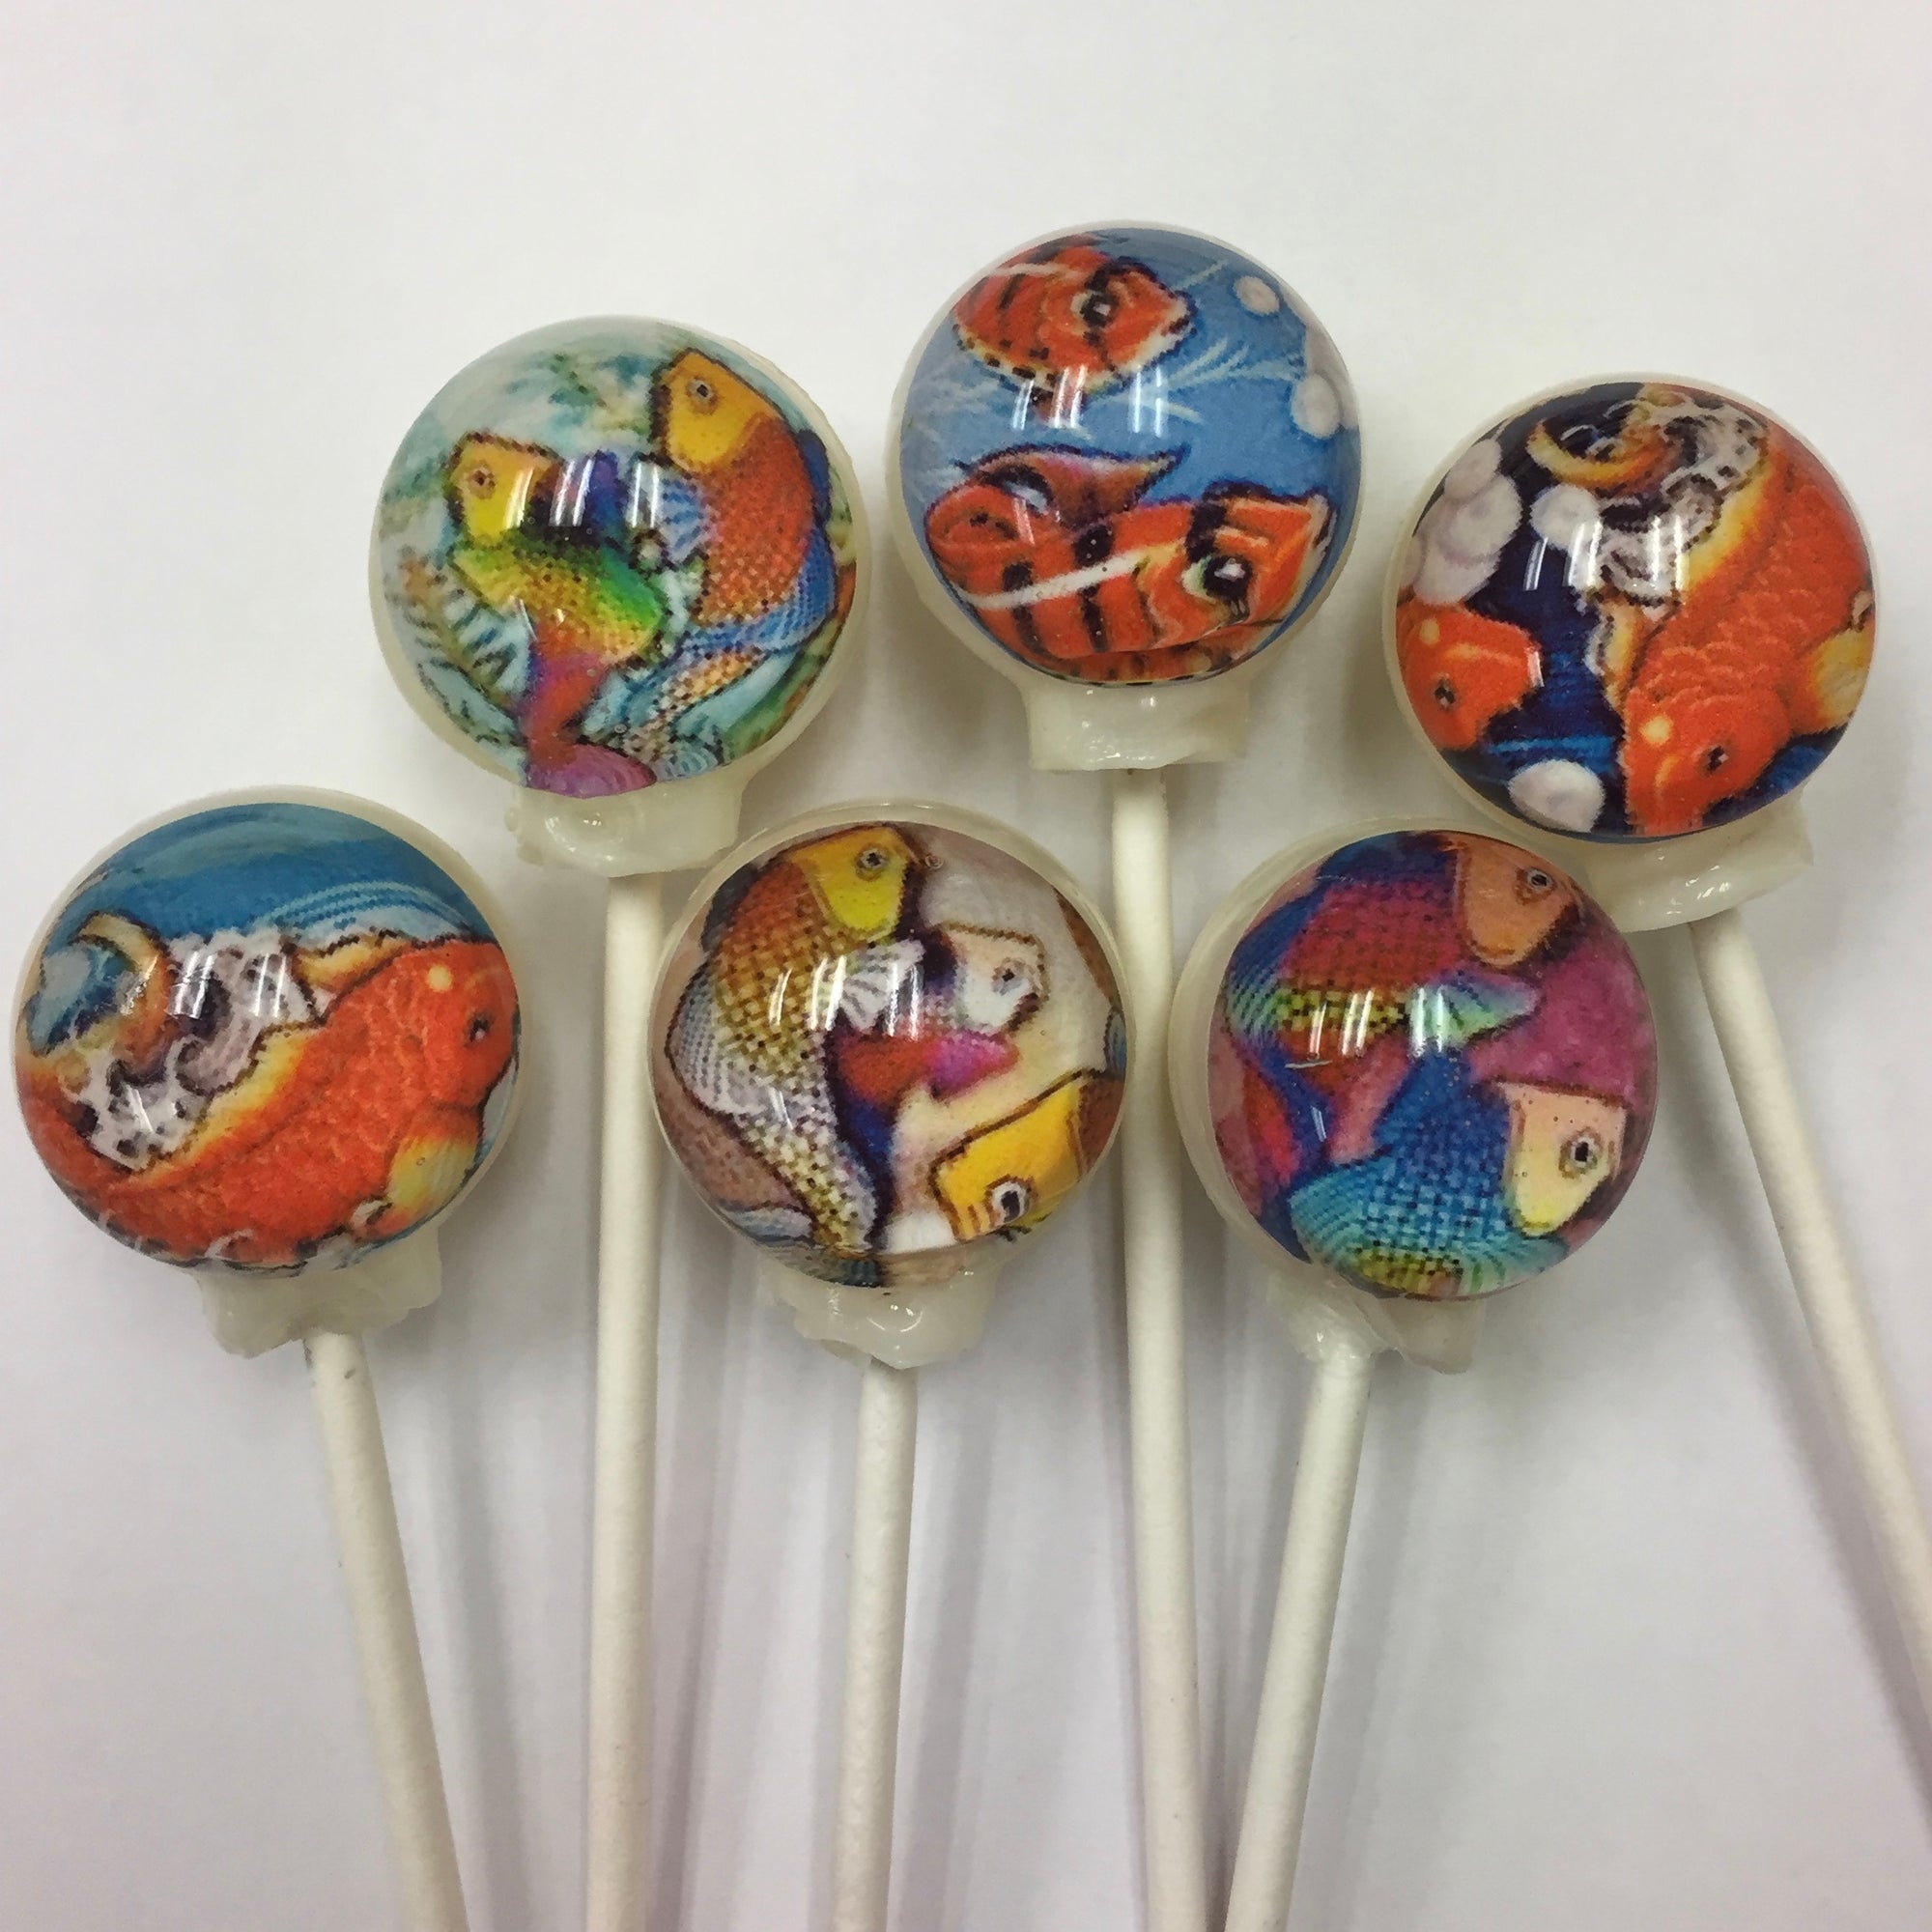 Koi Lollipops 6-piece set by I Want Candy!